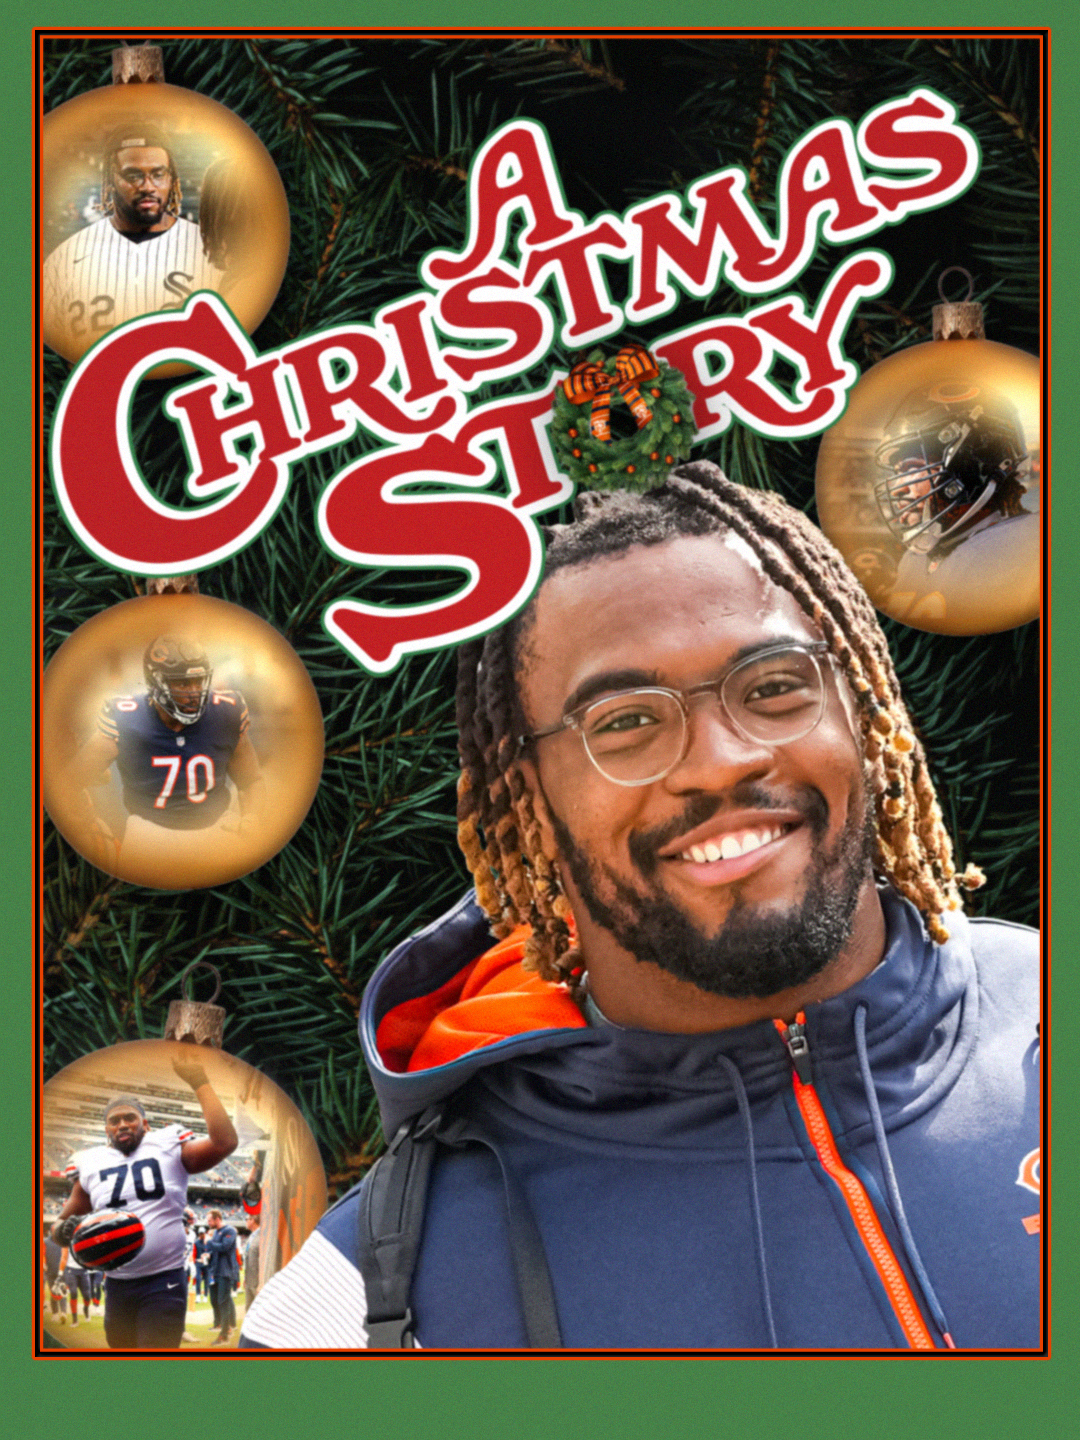 Braxton-AChristmas-Story_TW-3x4.png